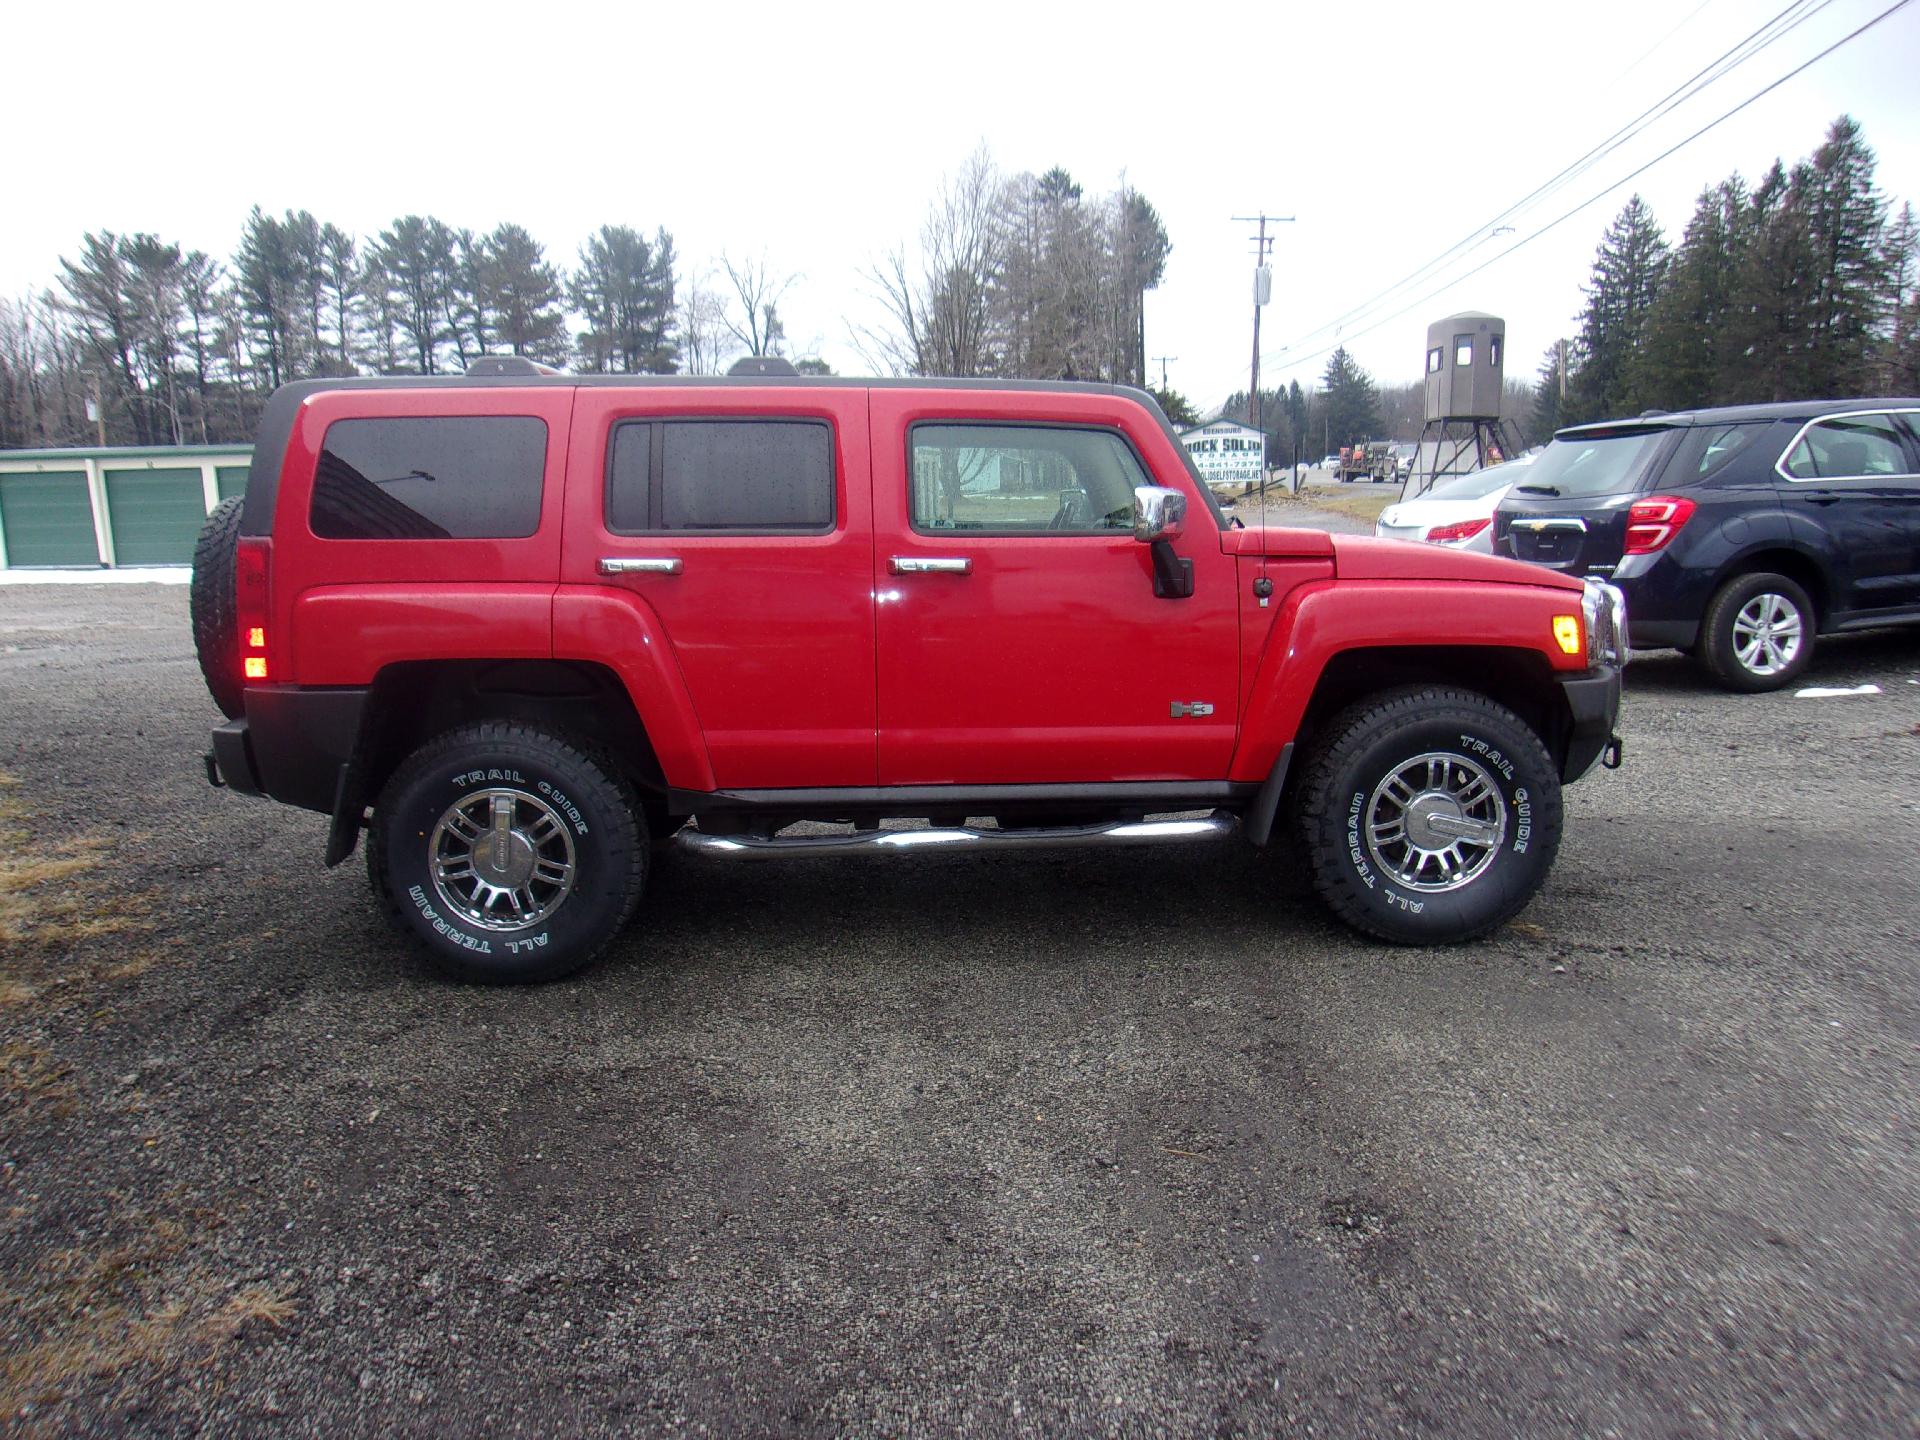 Used 2008 Hummer H3 H3 with VIN 5GTEN43E588190096 for sale in Ebensburg, PA